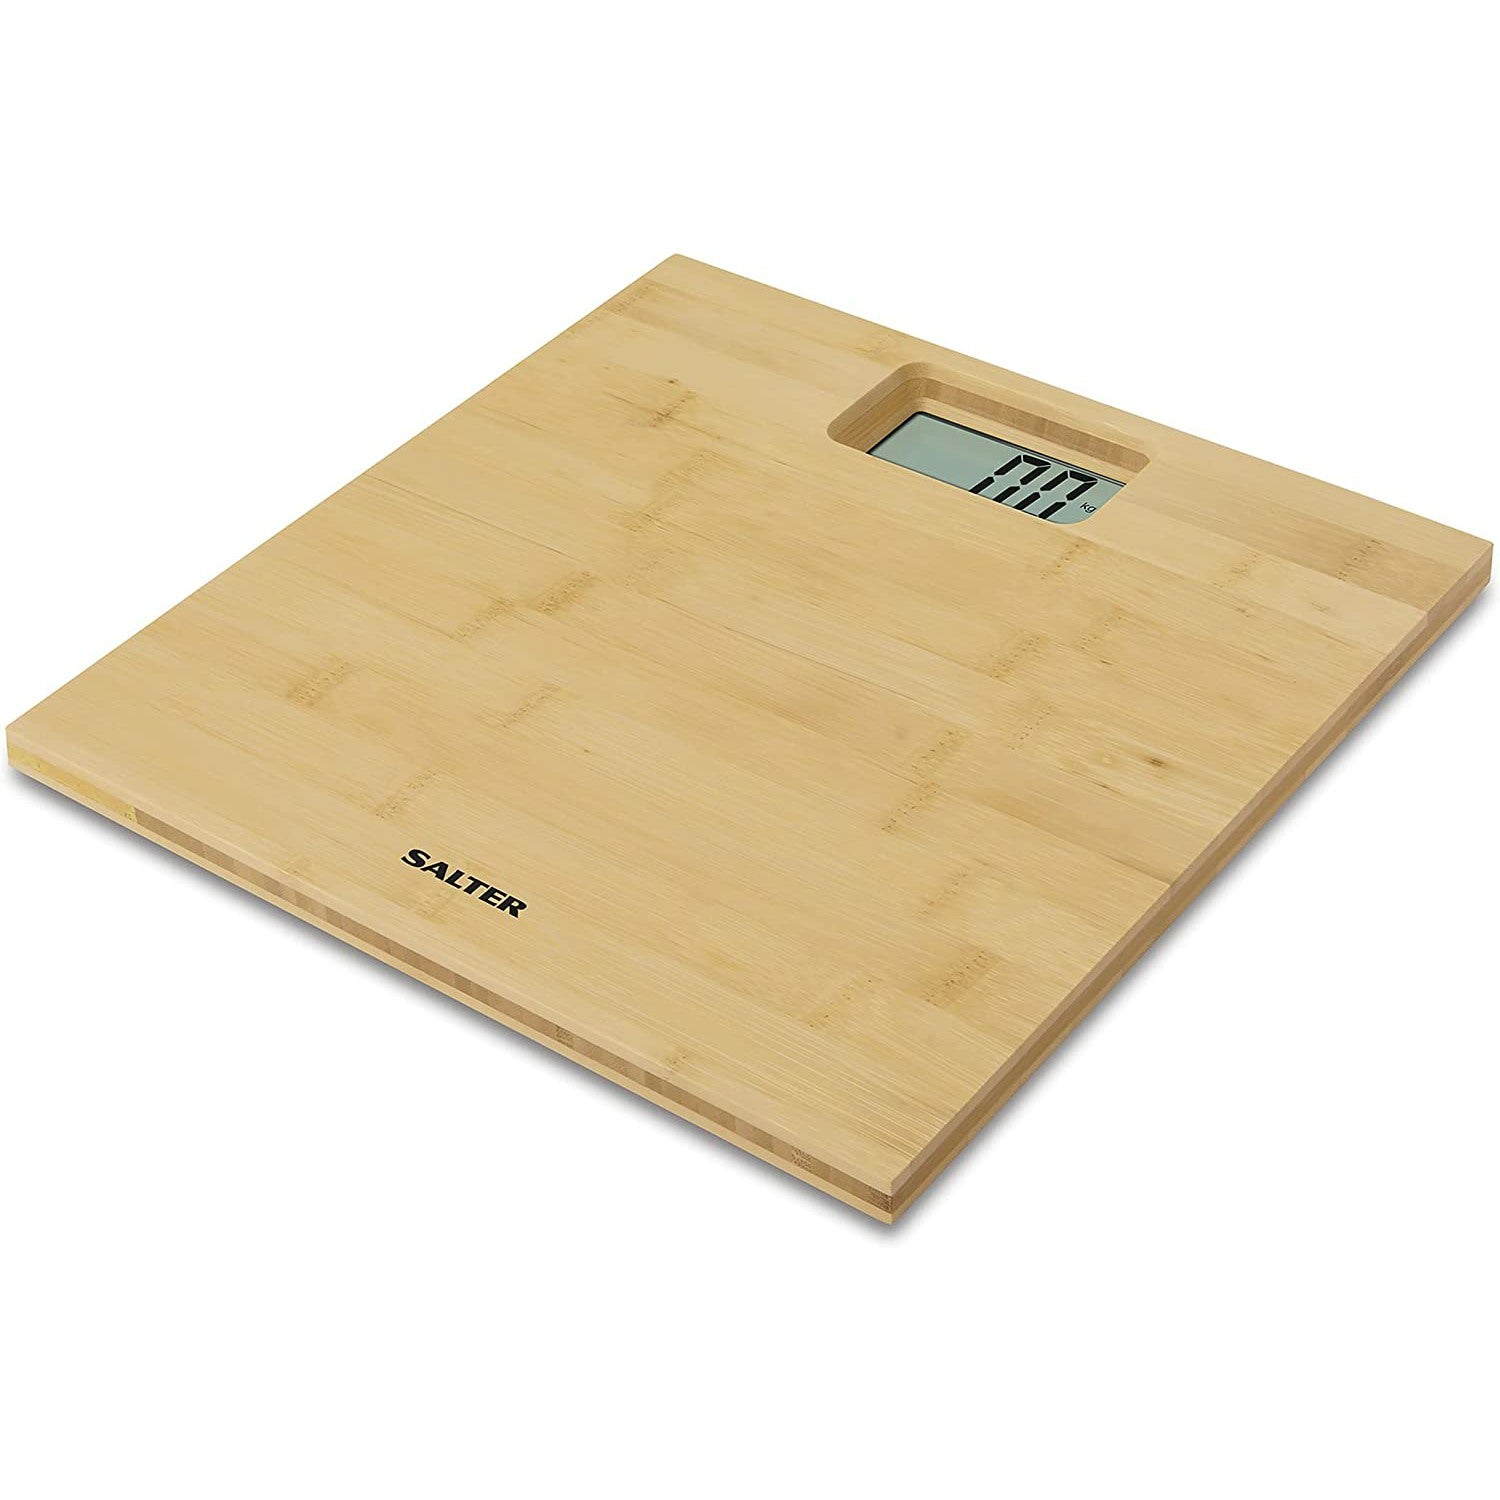 Salter Bamboo Electronic Bathroom Scale: 9086 WH3R